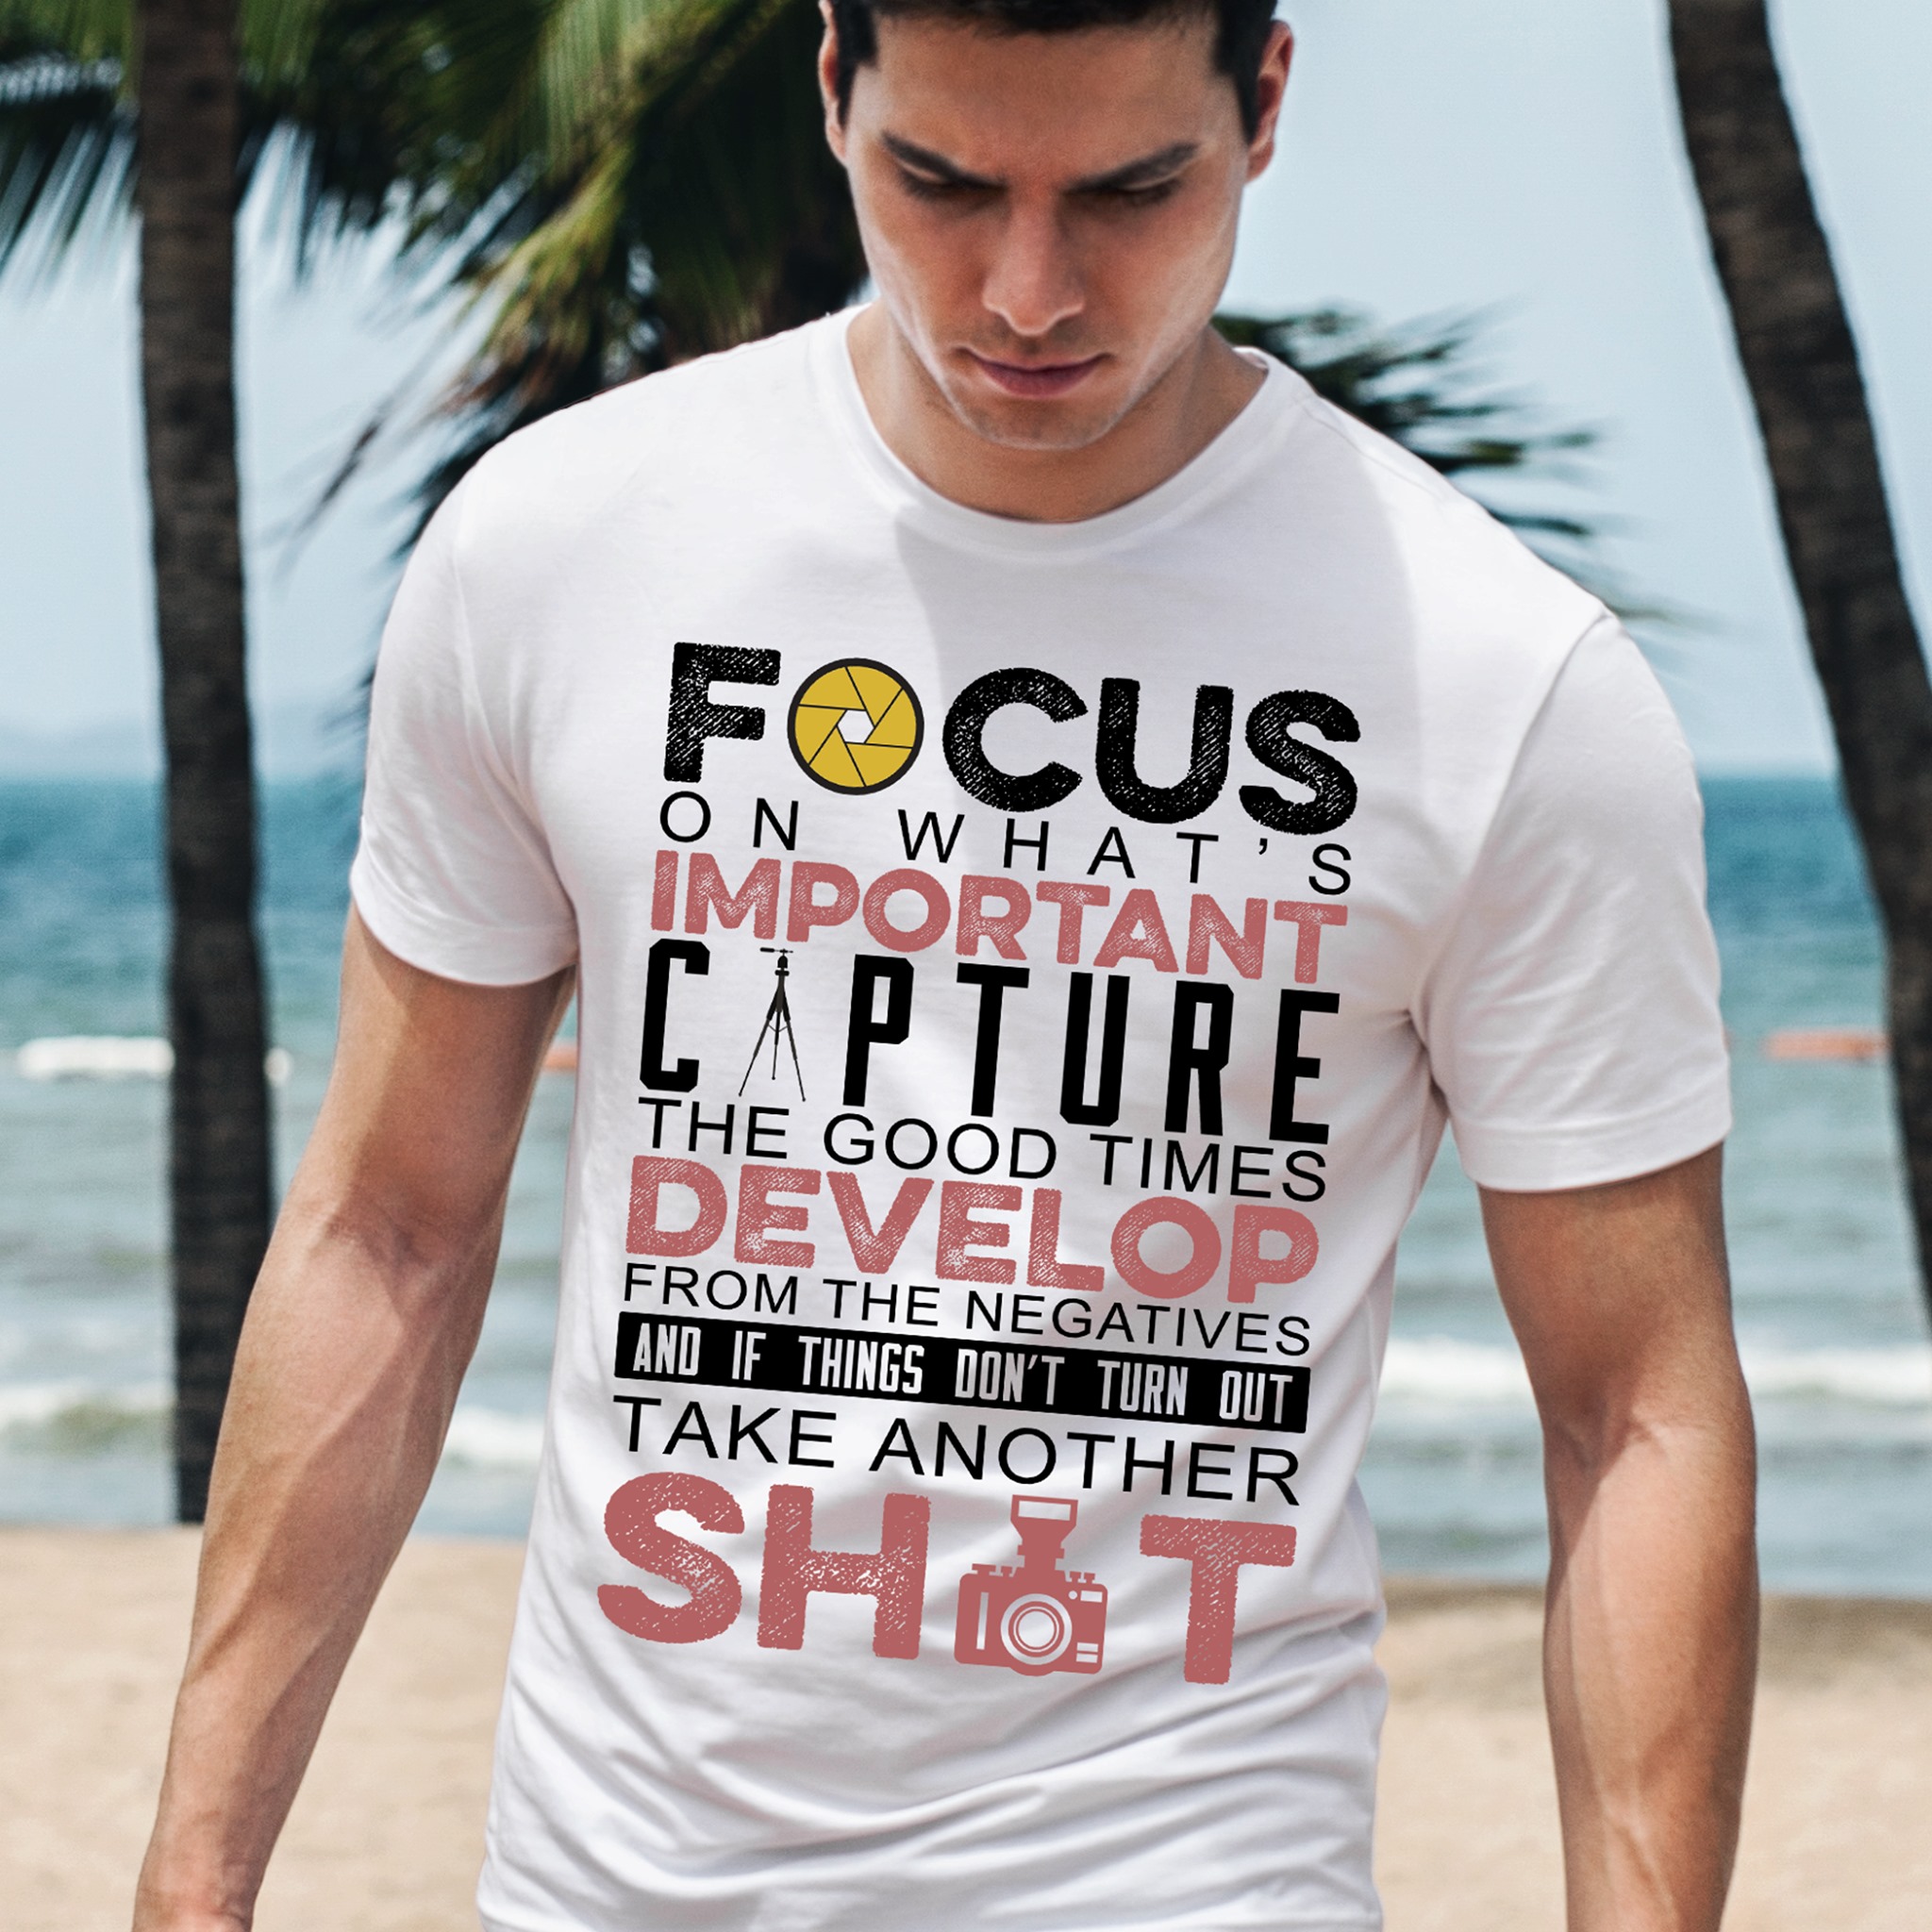 Focus on what's important capture the good times develop from the negatives - The photographer